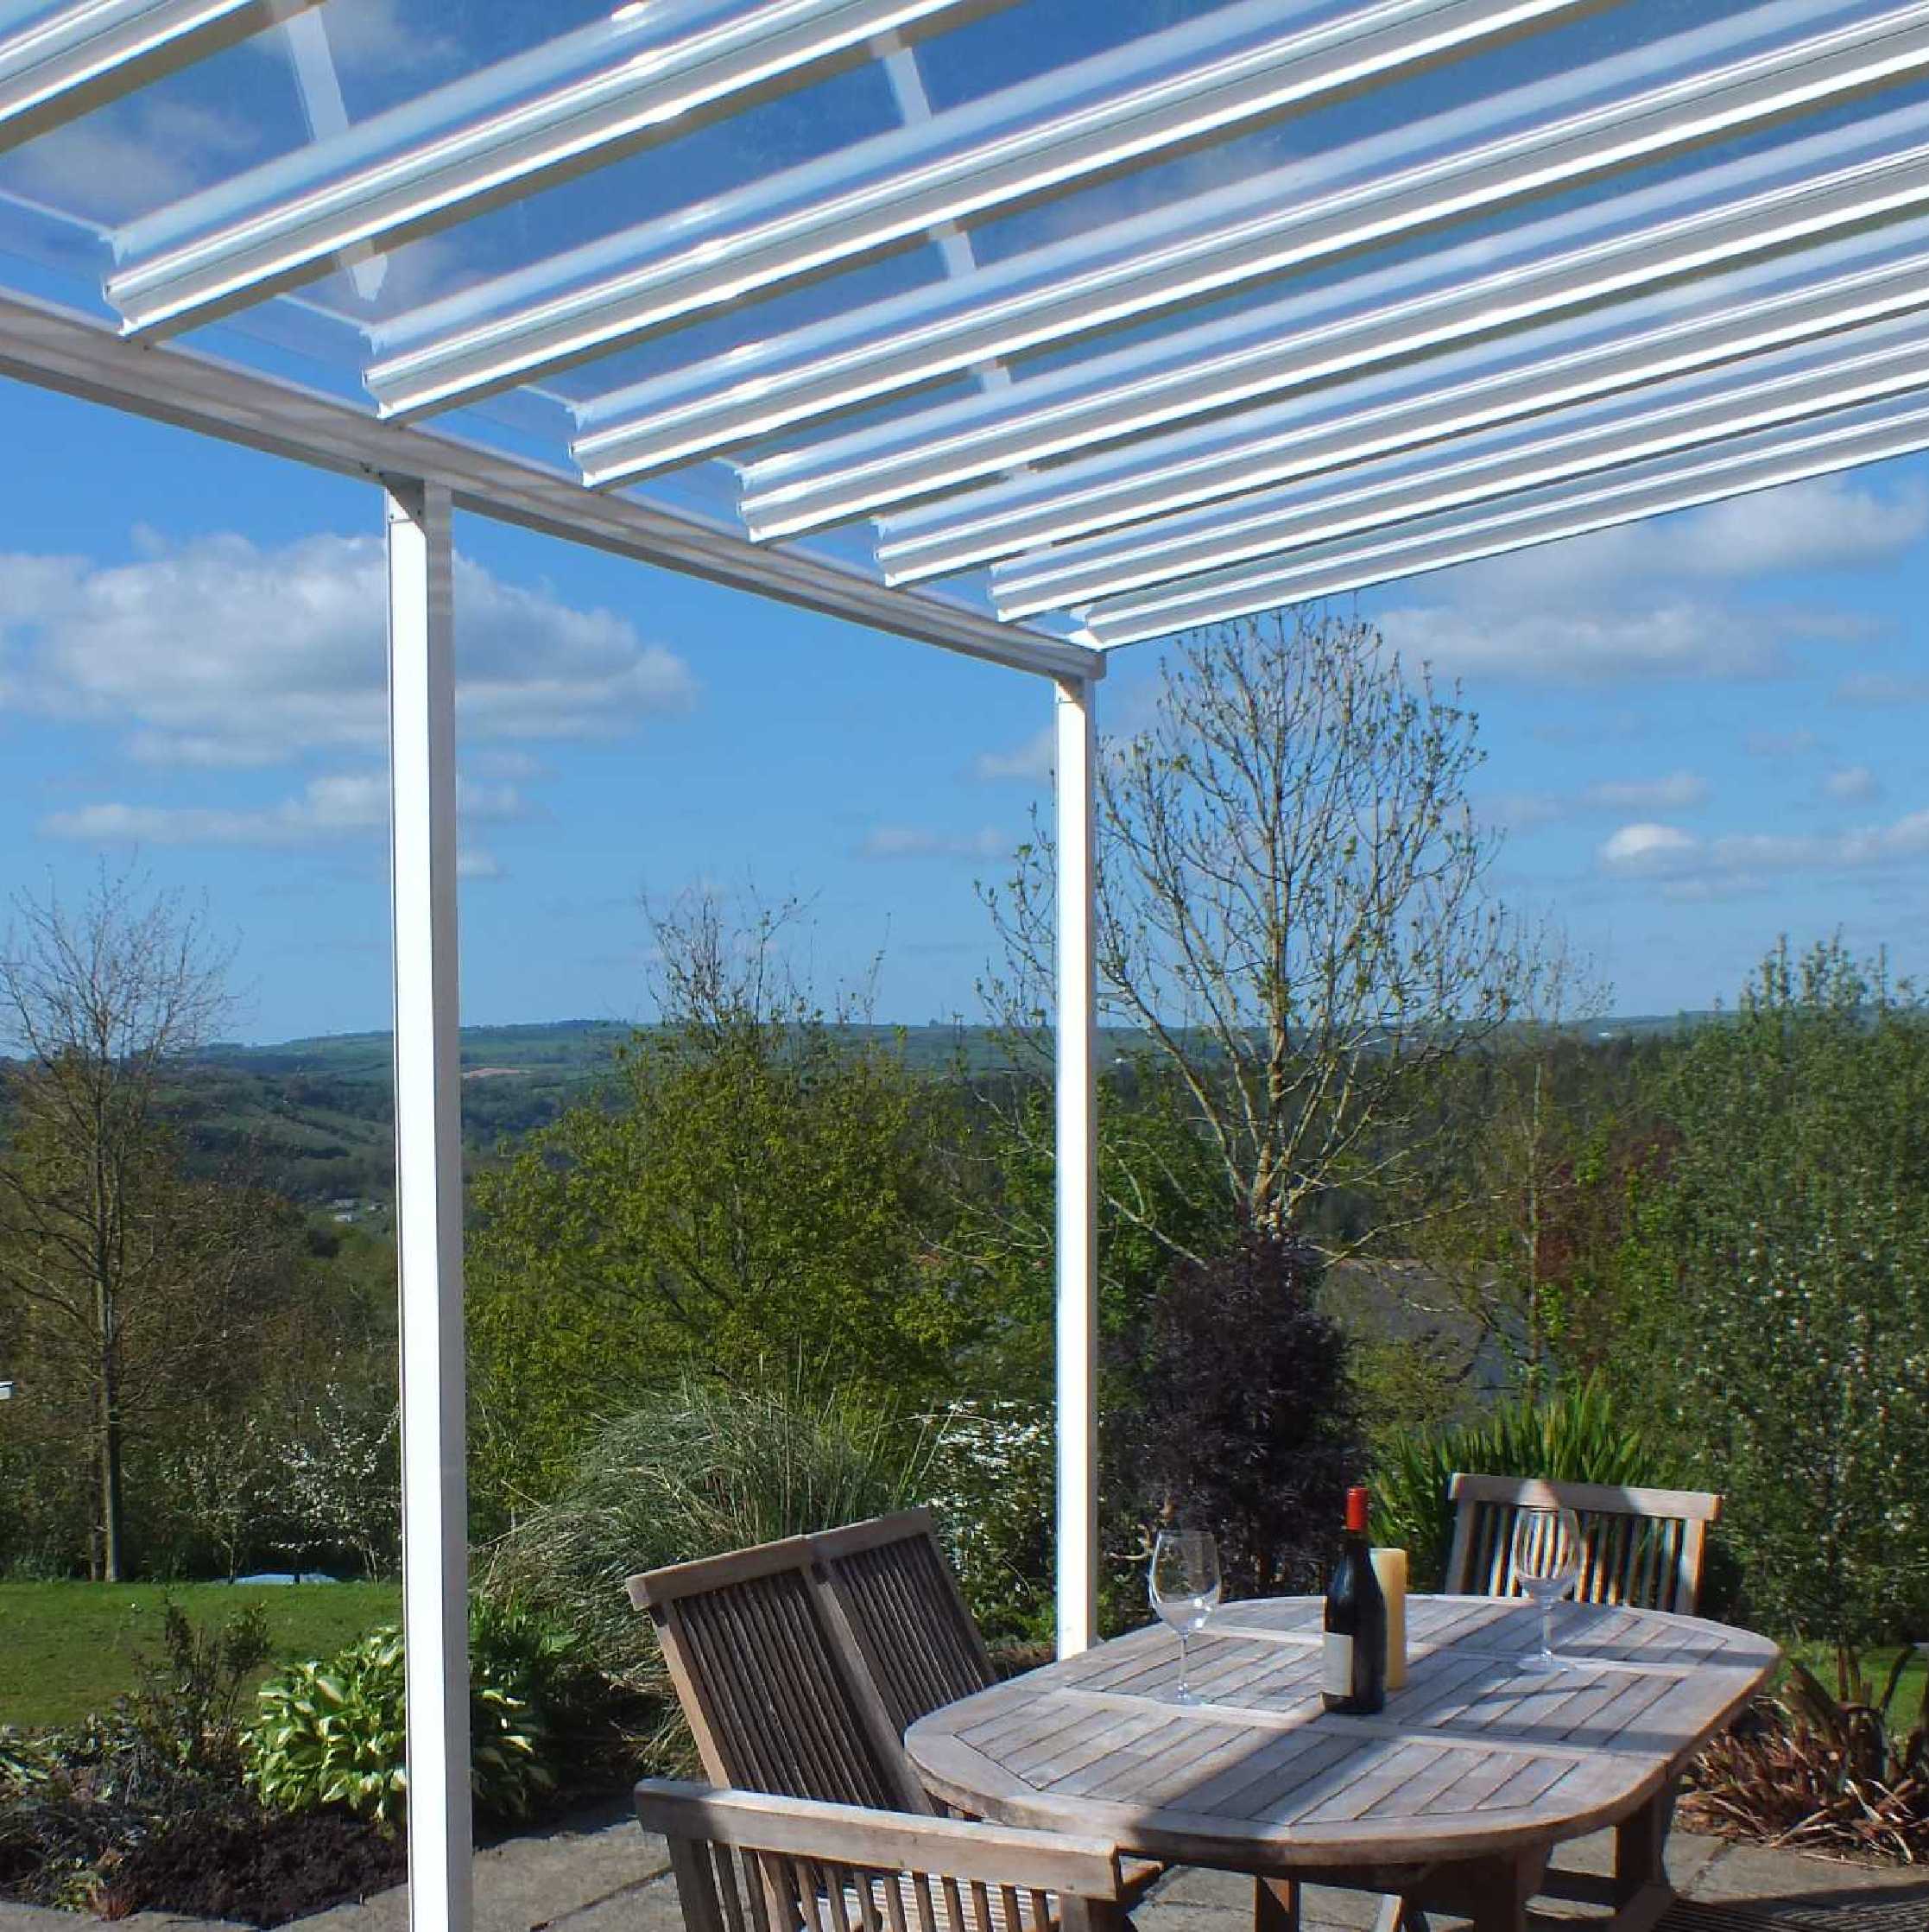 Buy Omega Smart Lean-To Canopy, White UNGLAZED for 6mm Glazing - 2.8m (W) x 1.5m (P), (2) Supporting Posts online today